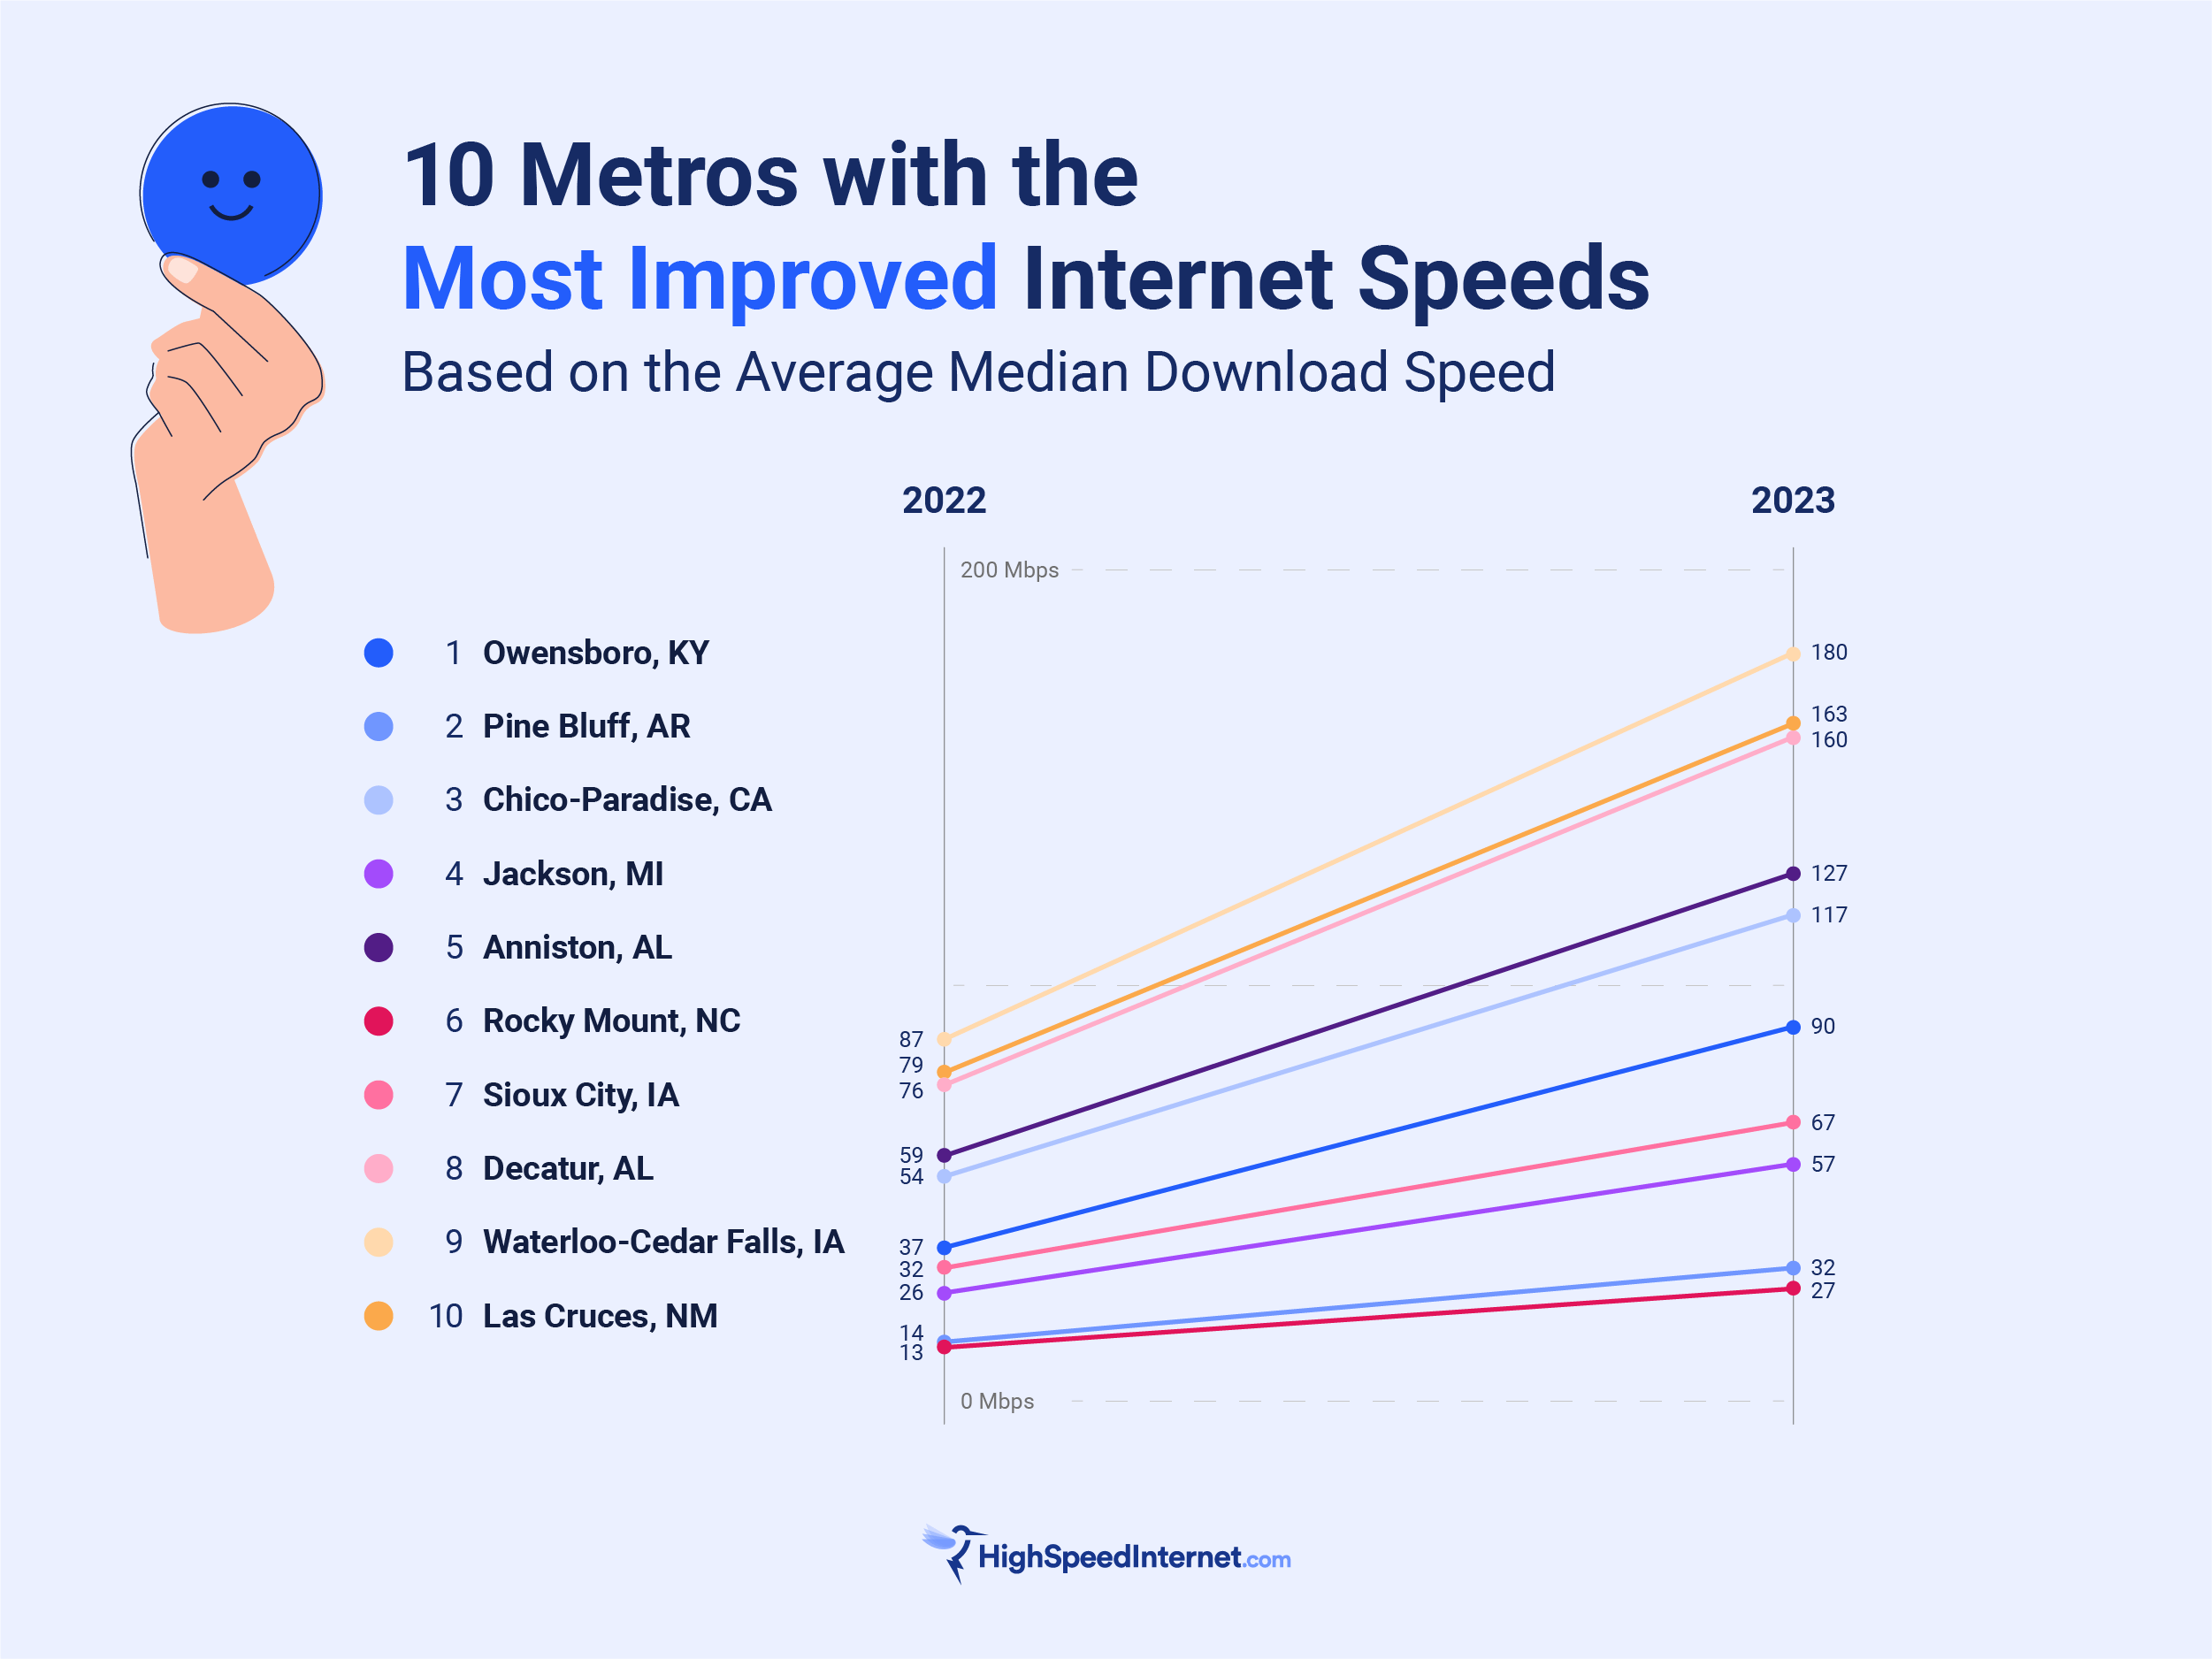 Line chart showing the US metro areas that have the most improved internet speeds from 2022 to 2023